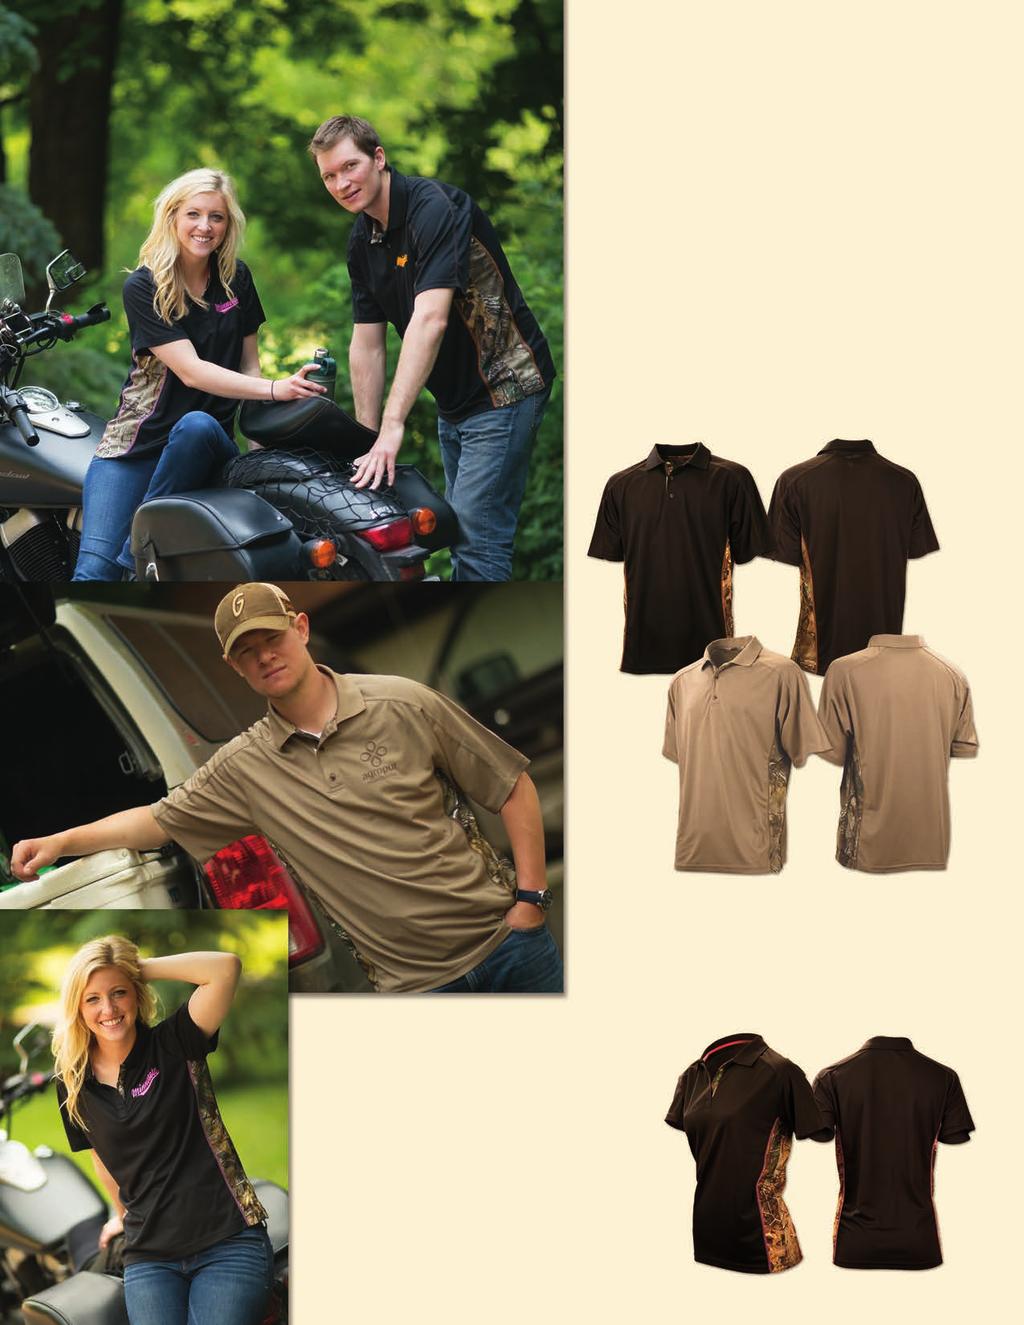 WILDERNESS POLO SHIRT Short-Sleeve Performance Polo Men s Wilderness Polo Shirt Summertime and the outdoors go hand and hand!